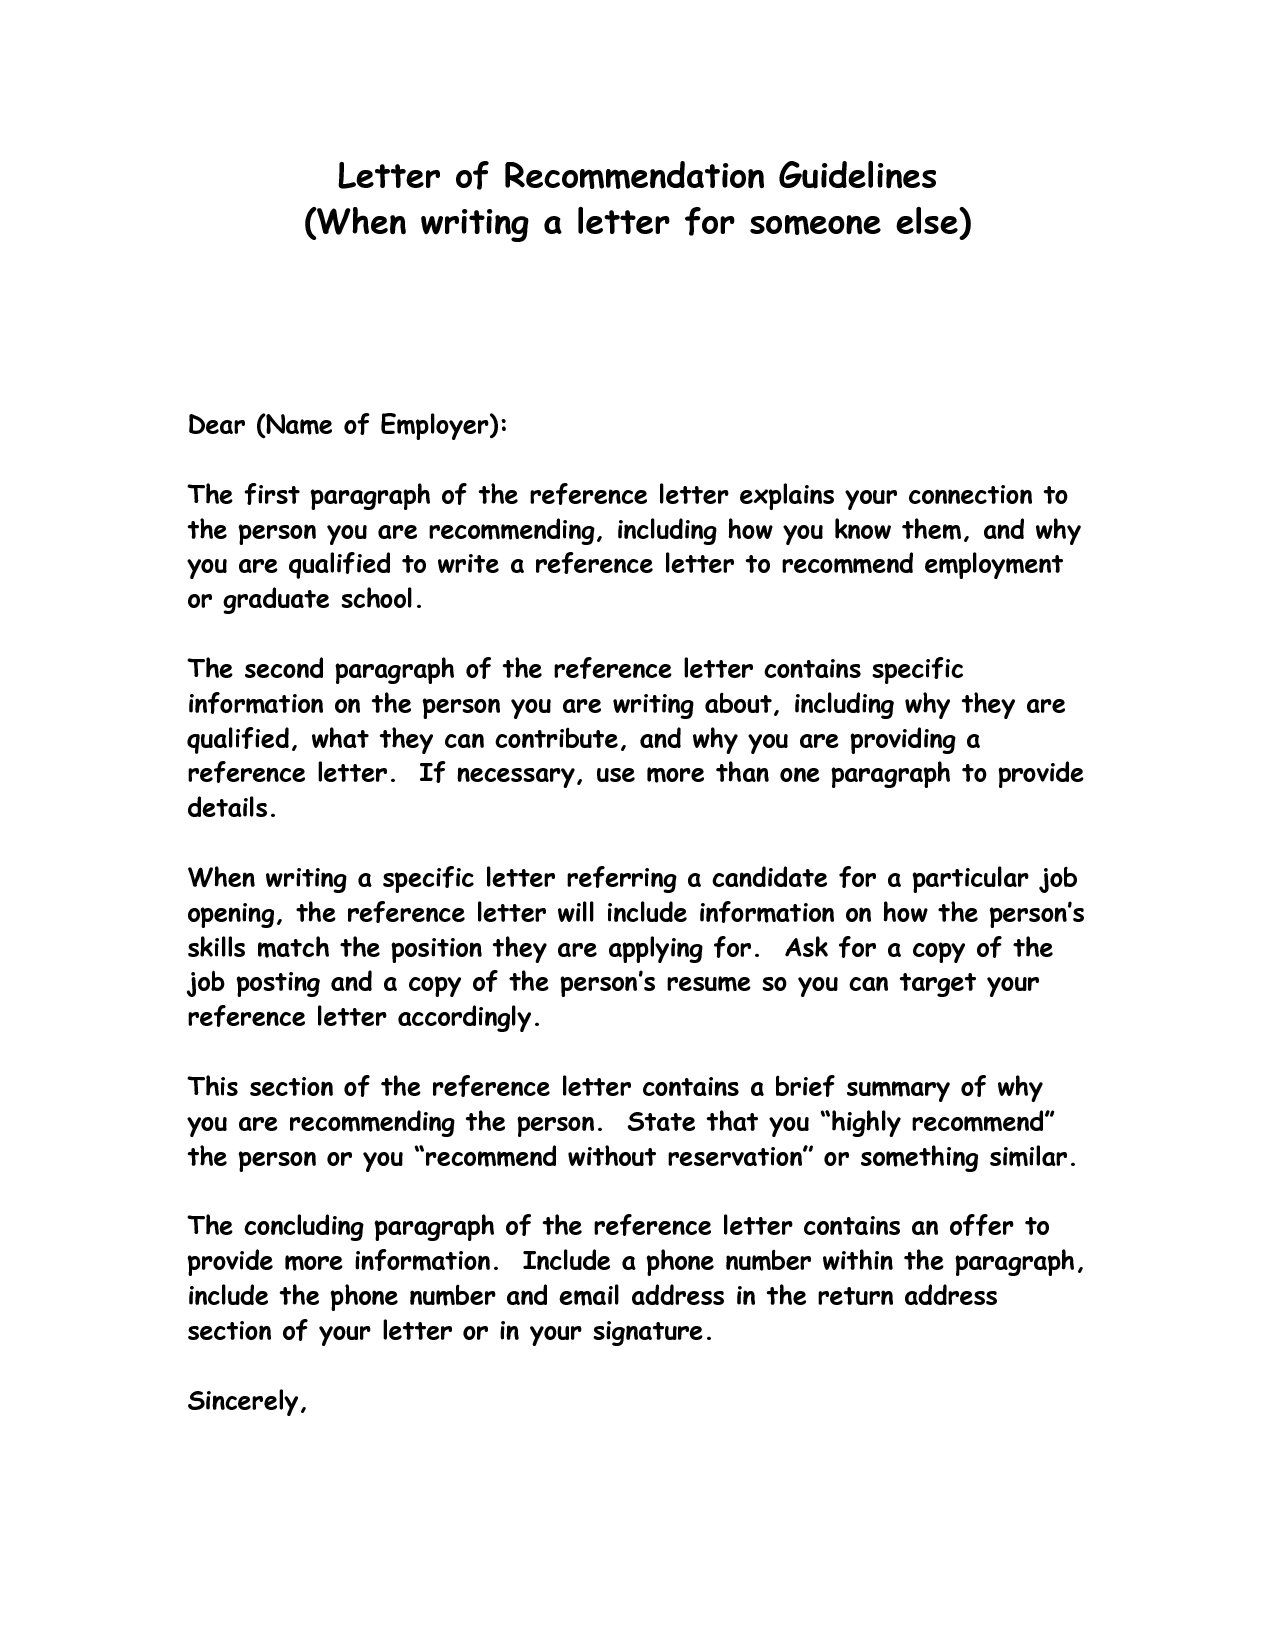 Law School Letter Of Recommendation Template - How to Write A Reference Letter Letter